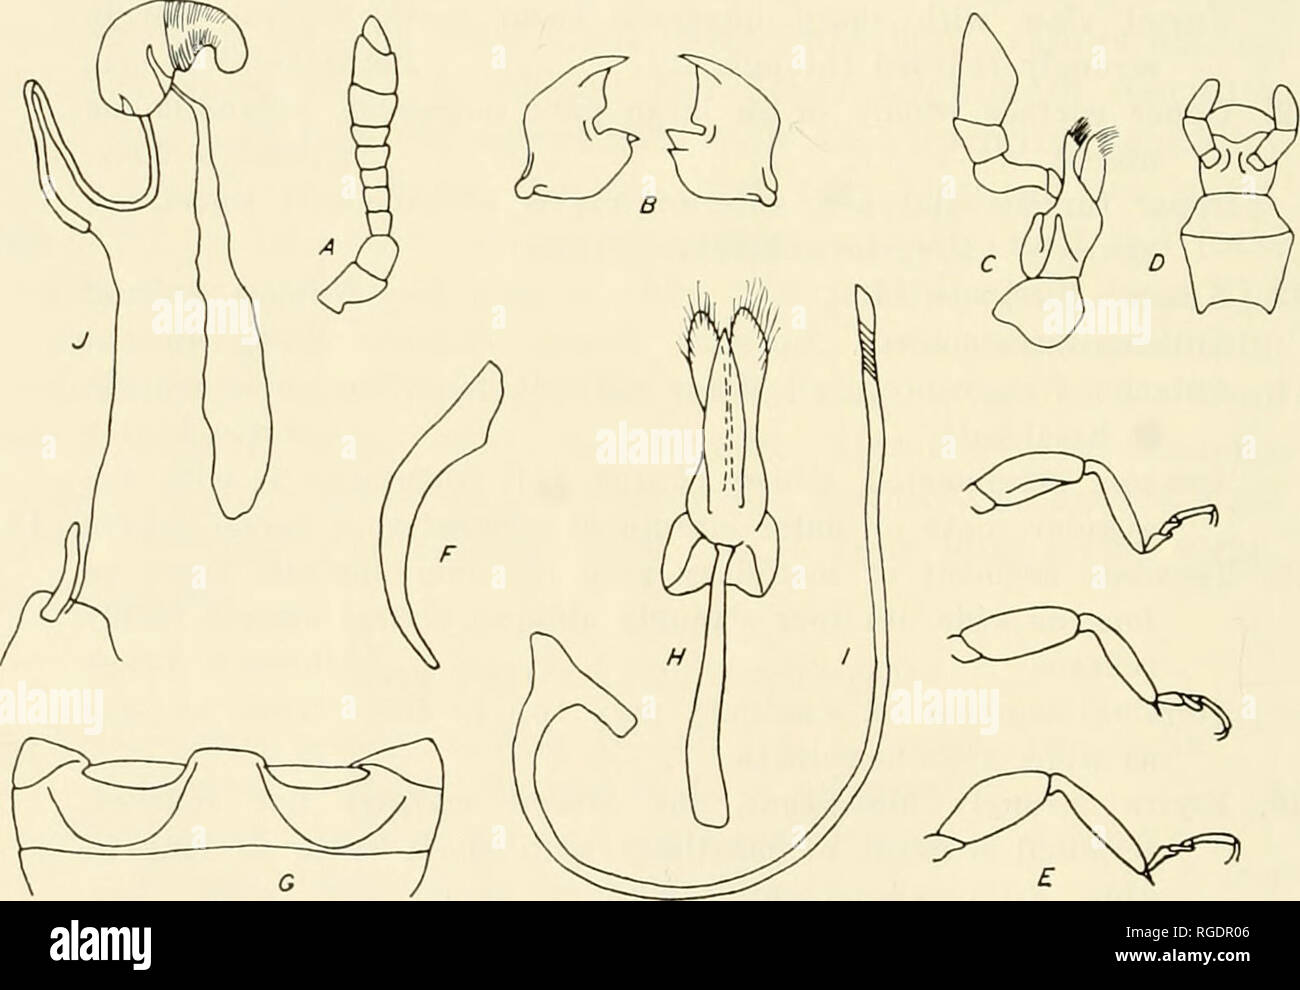 . Bulletin of the Museum of Comparative Zoology at Harvard College. Zoology. 236 BULLETIN: MUSEUM OF COMPARATIVE ZOOLOGY BrUMUS Mulsant Brumus Mulsant, 1850, Species Trimeres Seeuripalpes, p. 492; Crotch, 1874, Eevision of the Coceinellidae, p. 195; Weise, 1885, Best.-Tab. Europ. Coleopt., Coeciiielliden, II, ed. 2, p. 5. Type species. Cocoinella octosignata Gebler, through synonymy with C. desertorum Gebler, by subsequent designation of Crotch, 1874. Chilocorini with form broadly oval, moderately convex, upper surface glabrous. Antenna ten-segmented; first segment stout, less than twice as lo Stock Photo